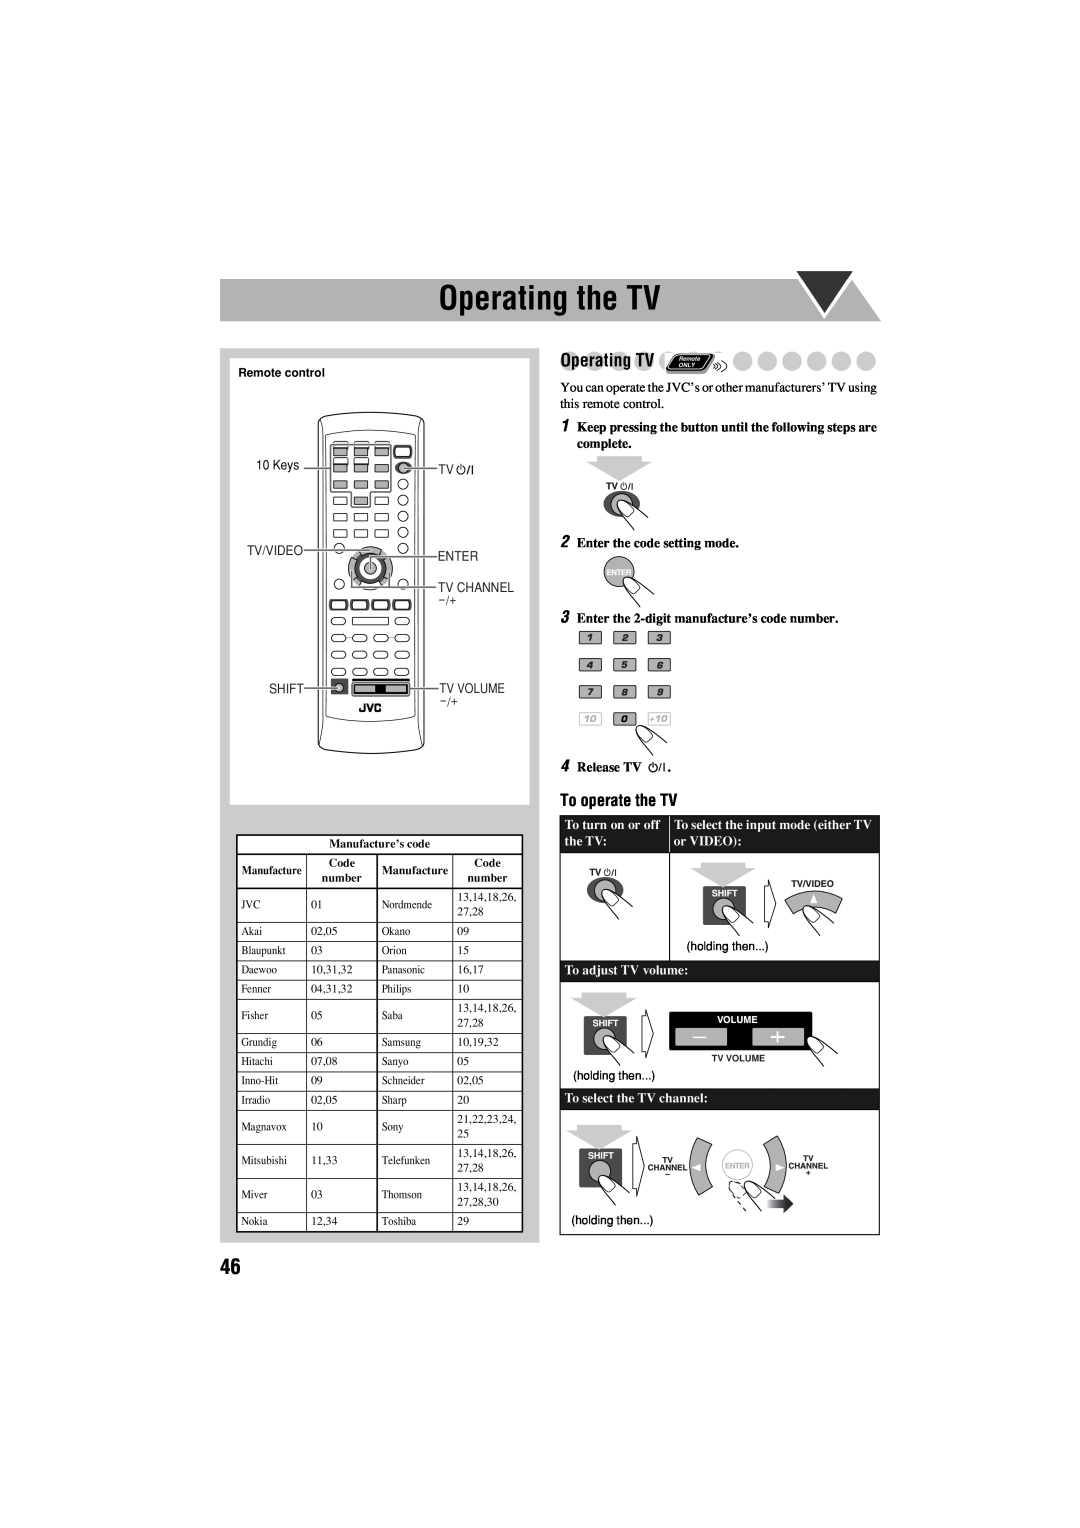 JVC GVT0125-003A manual Operating the TV, Operating TV Remote, To operate the TV, Keys, Tv/Video Enter, 4Release TV 